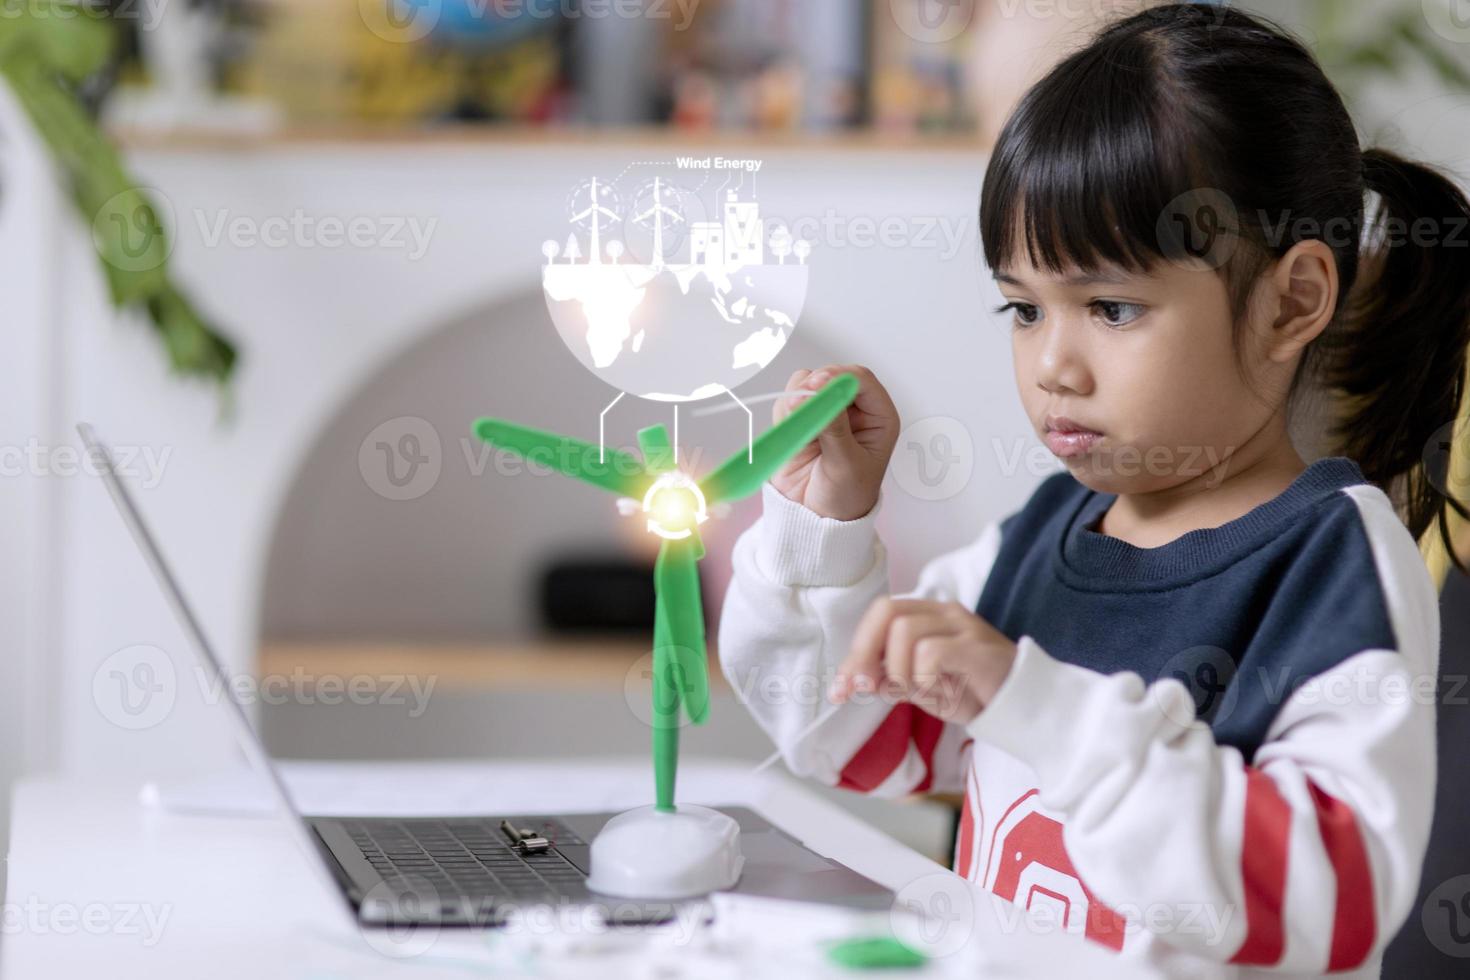 renewable energy, science, and technology concept - happy children with laptop computers, wind energy hologram,s and wind turbine models and icons. photo